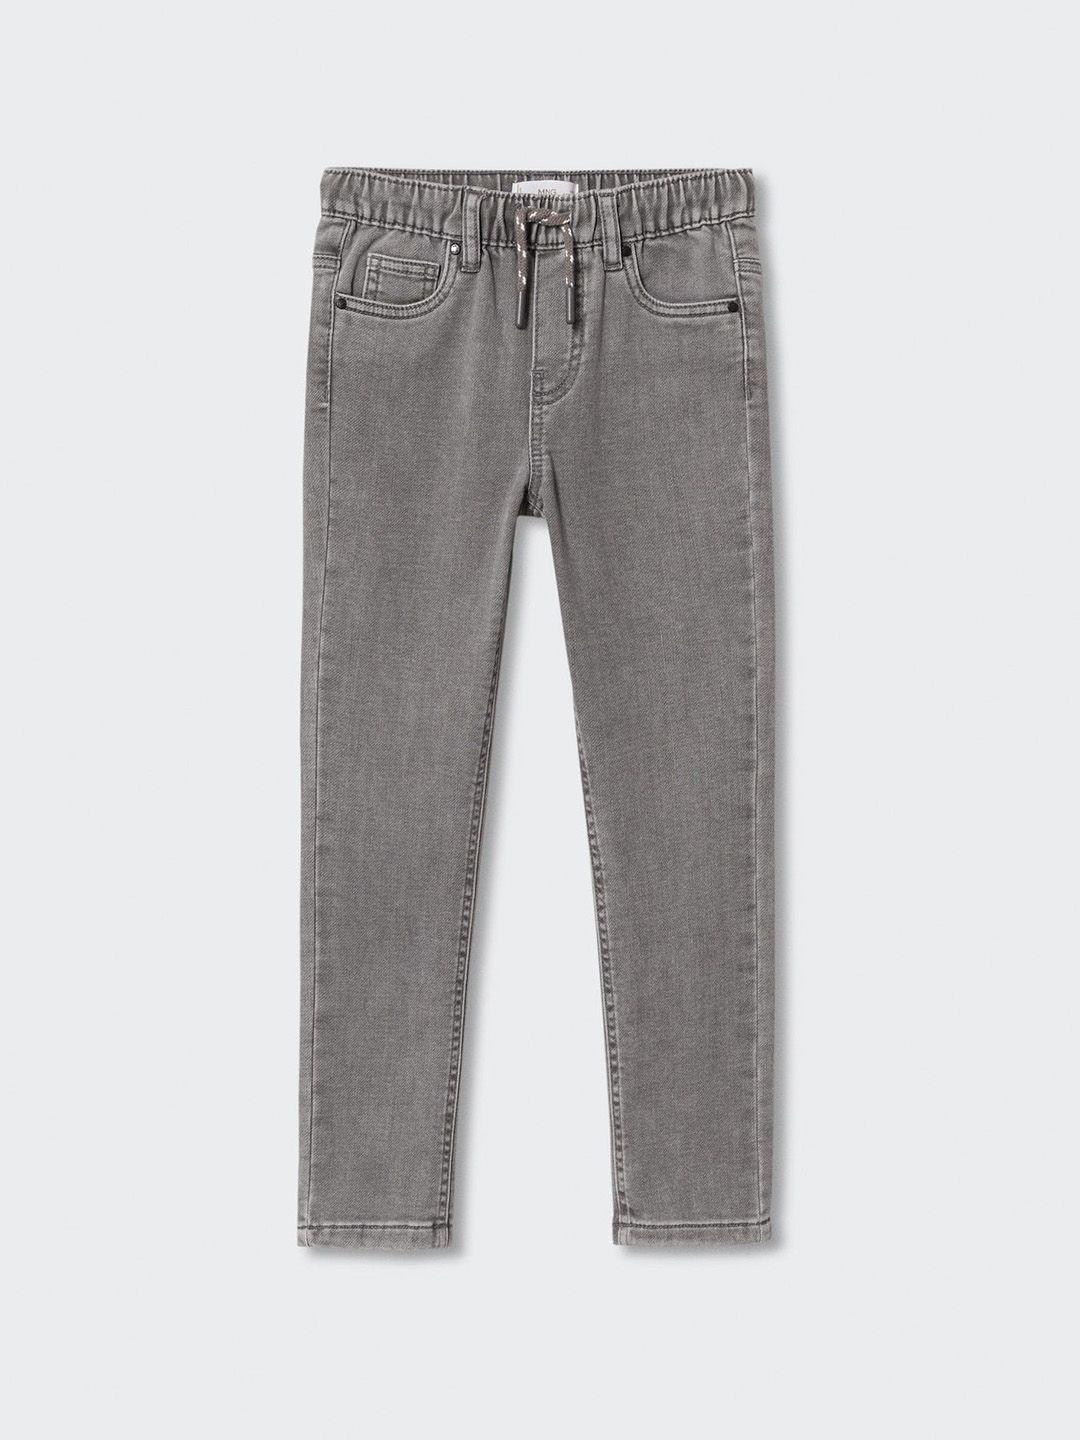 mango-kids-boys-grey-solid-sustainable-stretchable-light-fade-slim-fit-jeans